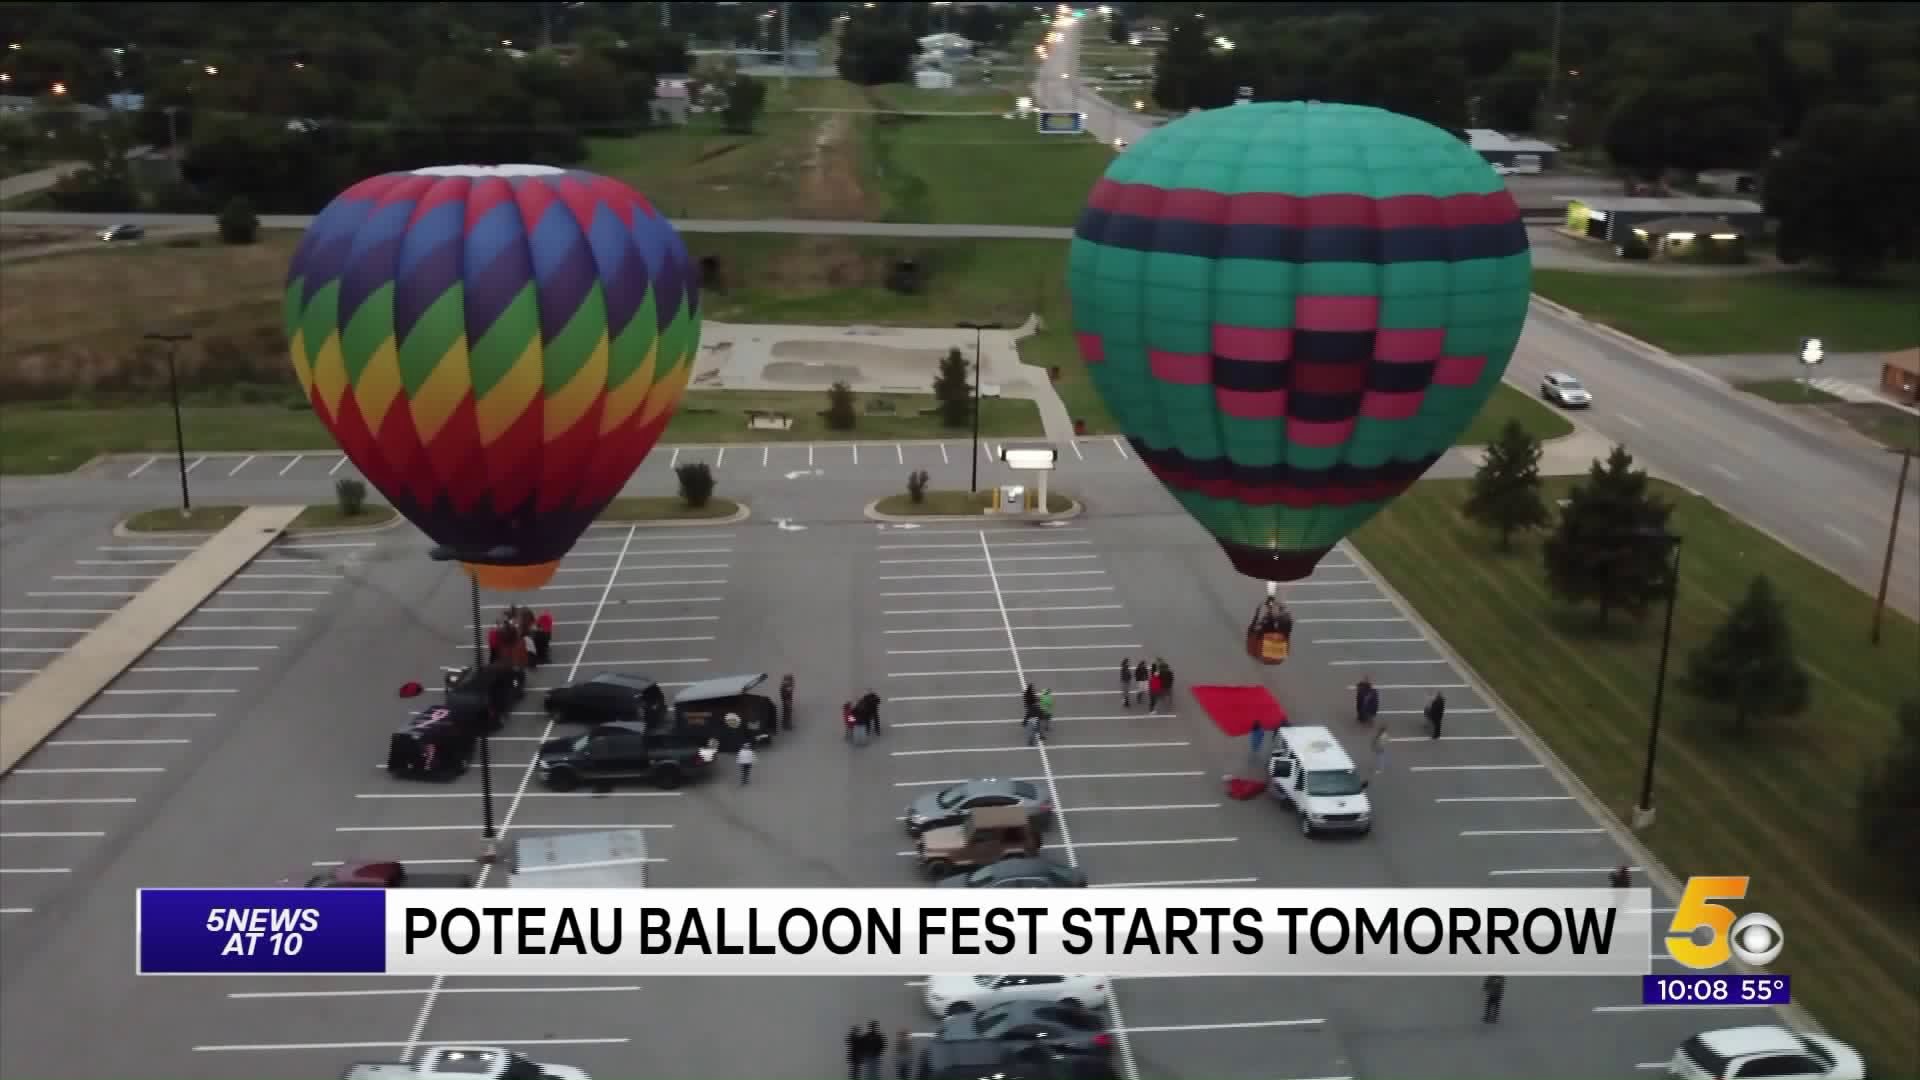 Poteau Balloon Festival Taking Off This Weekend At LeFlore County Fairgrounds